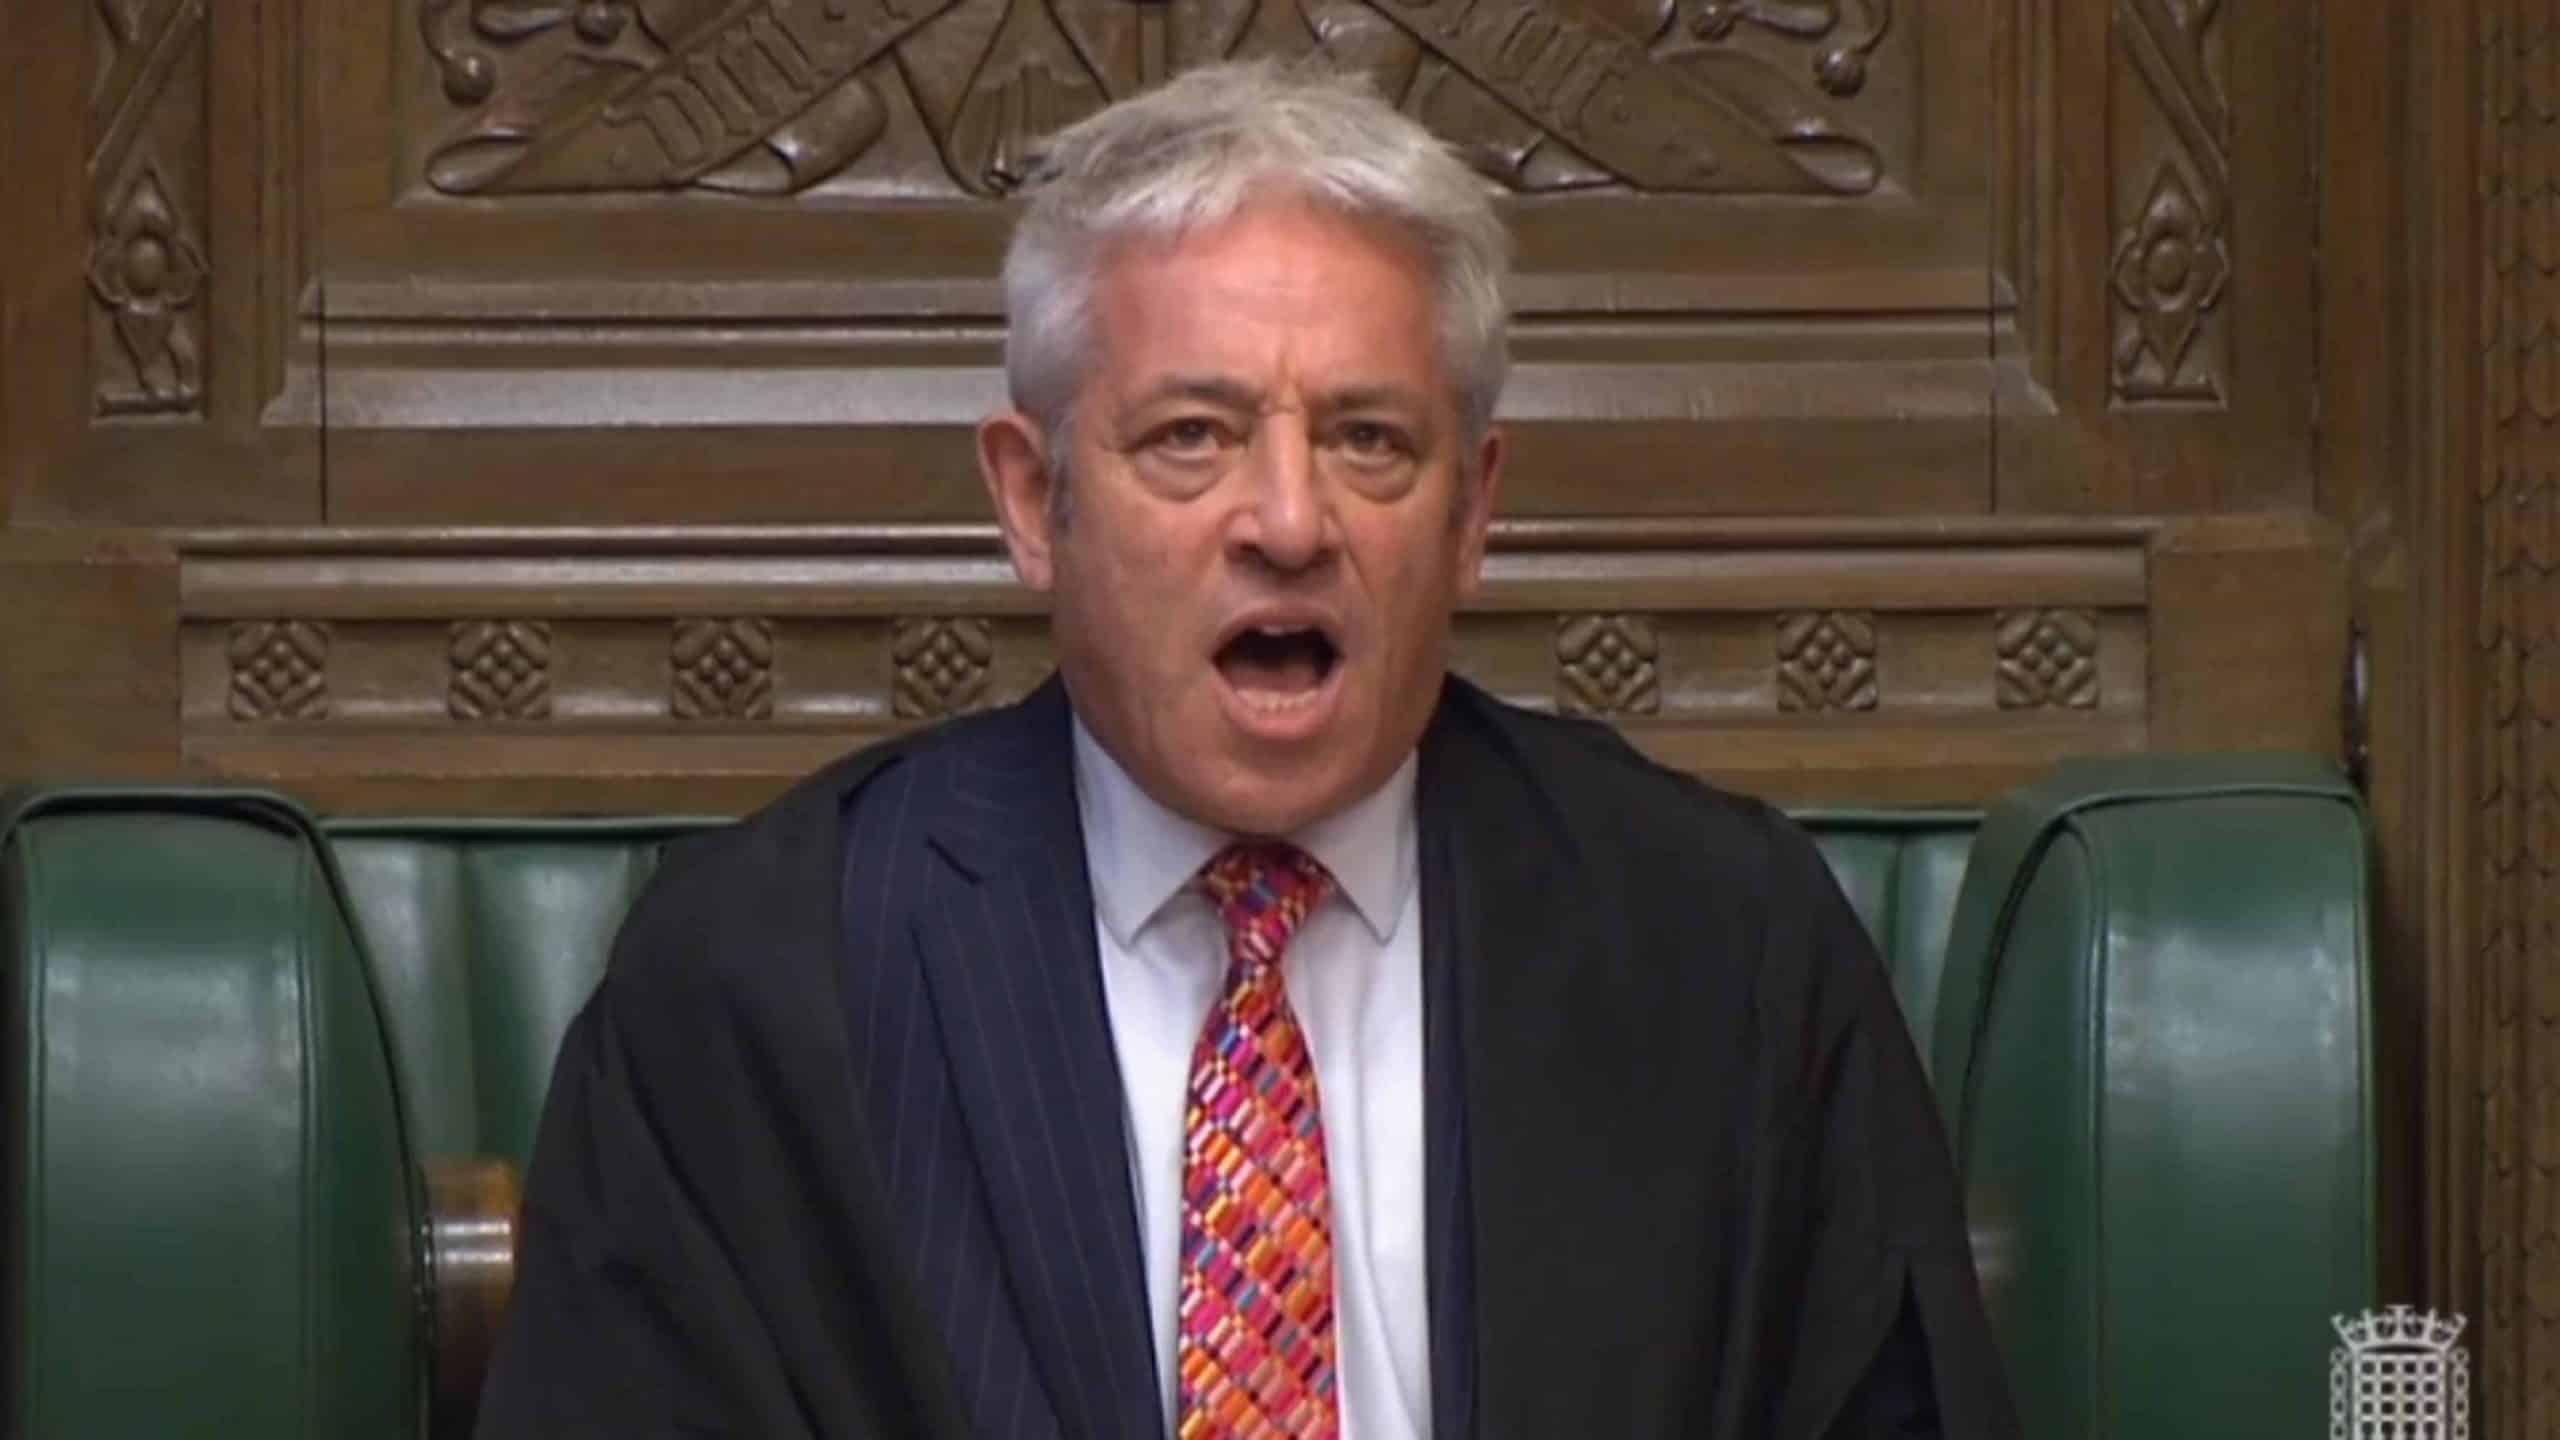 John Bercow pleads with MPs to tackle “toxic” political culture